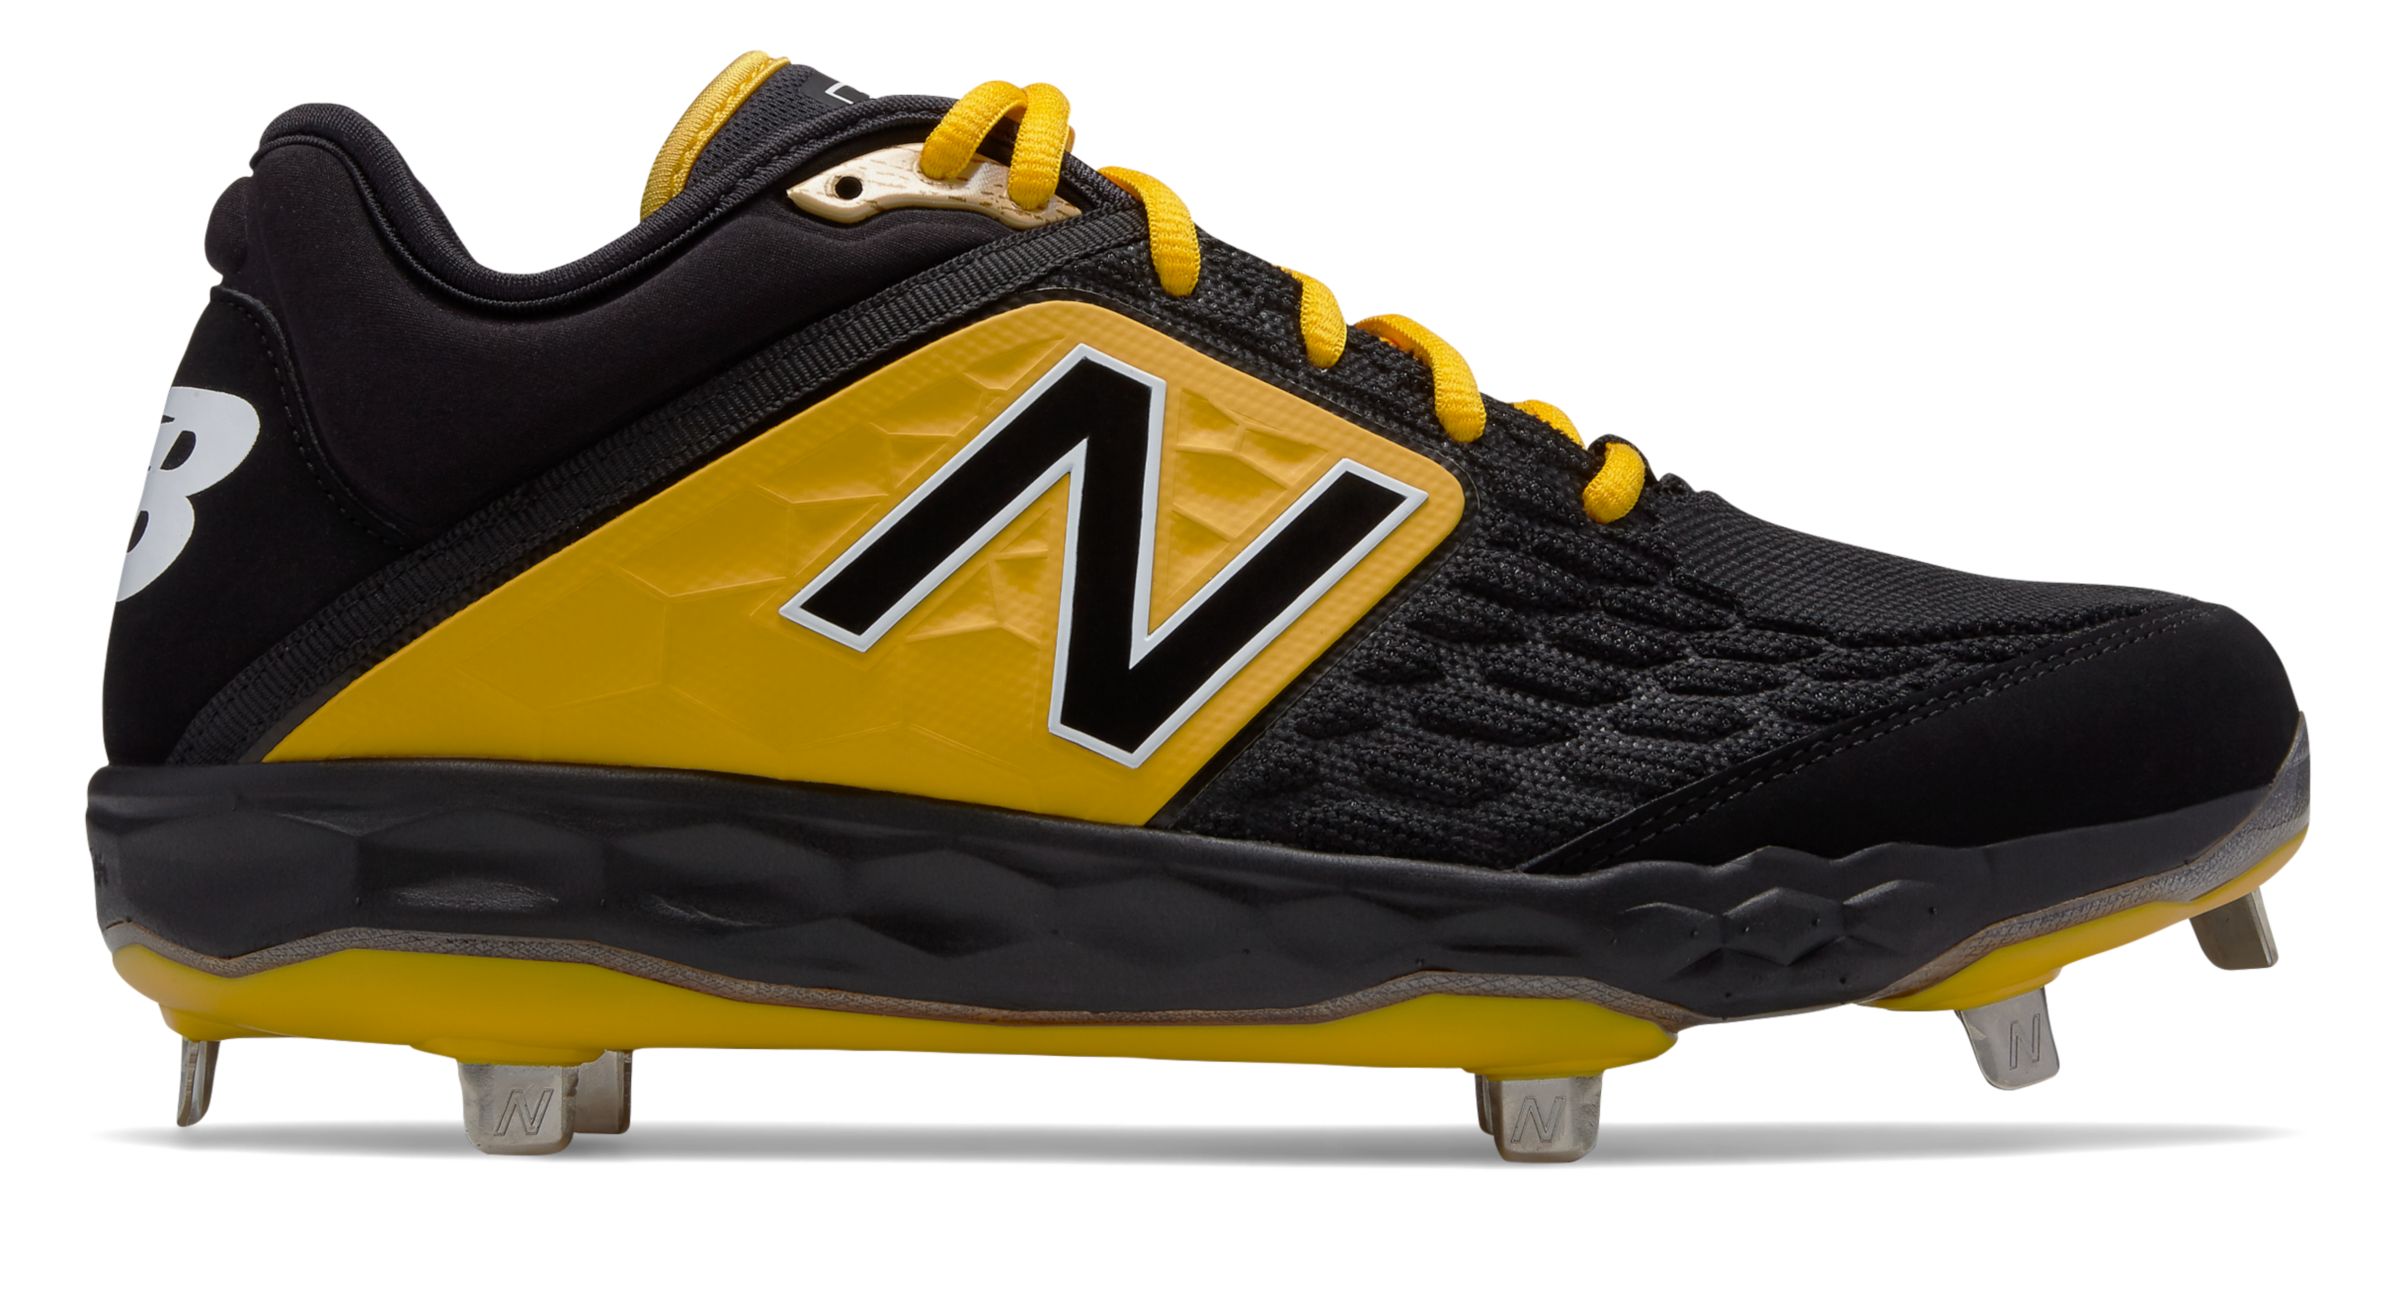 New Balance Low-Cut 3000v4 Metal Baseball Cleat Mens Shoes Black with Yellow - image 1 of 4